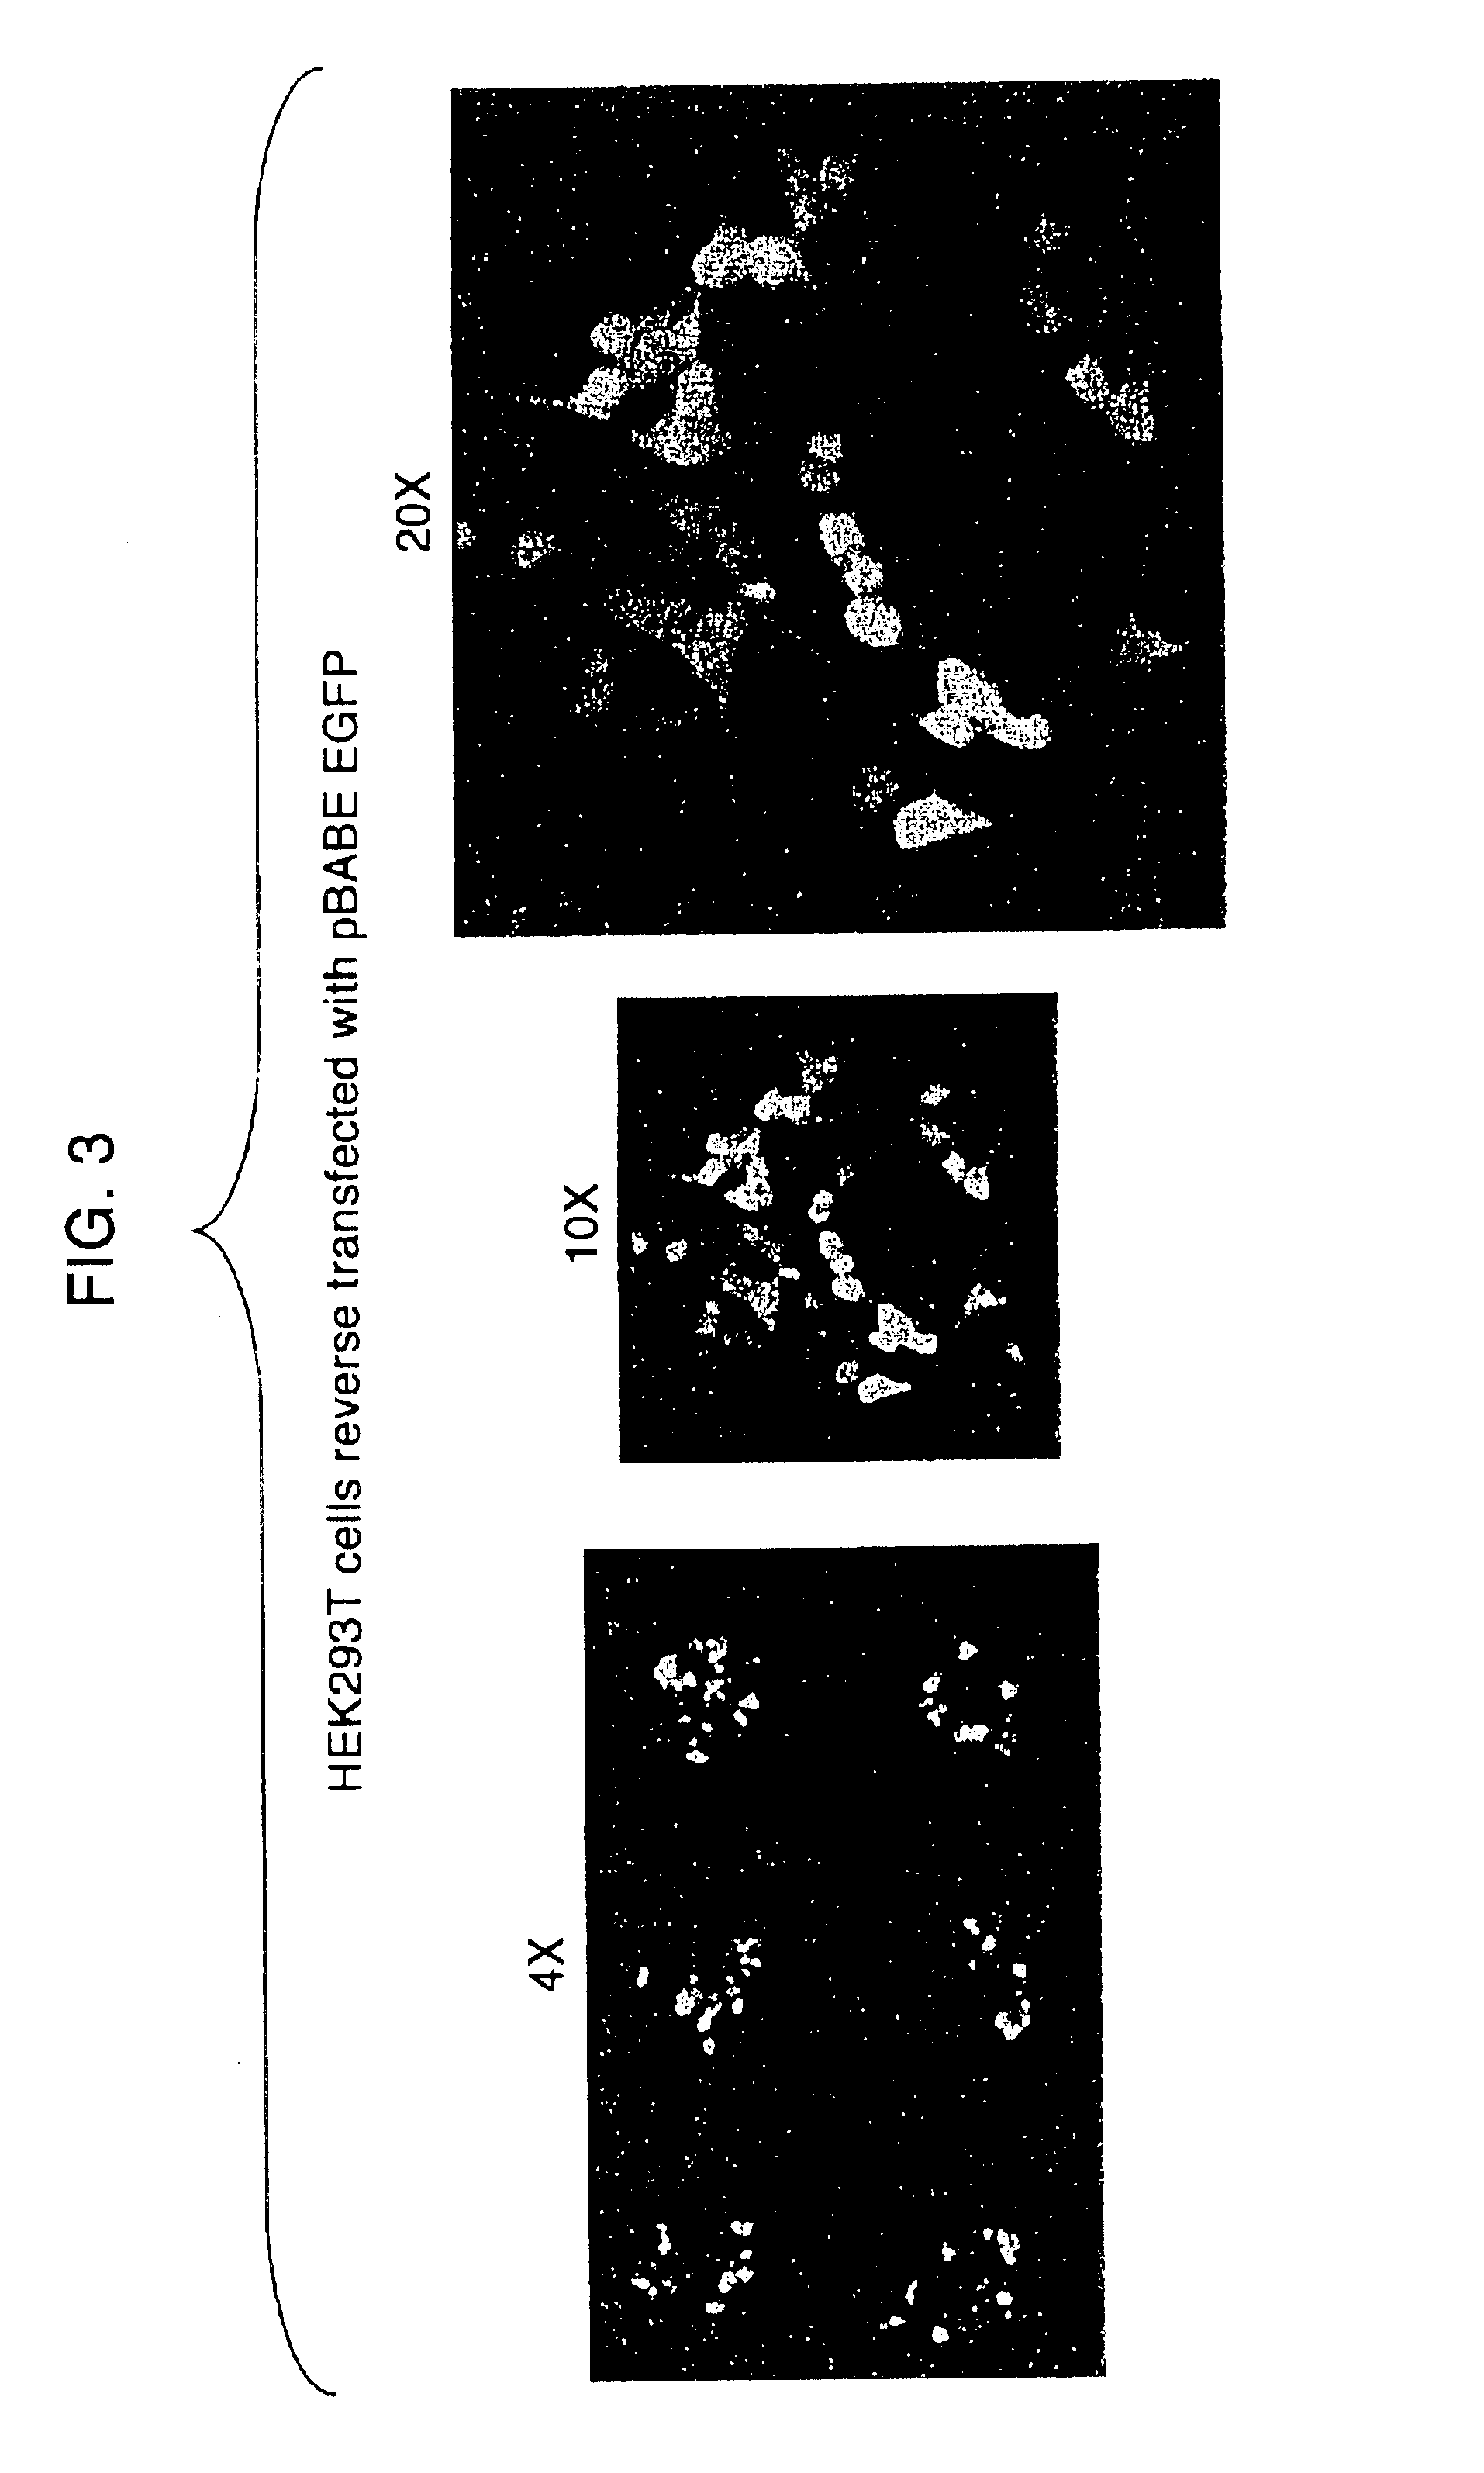 Transfection method and uses related thereto